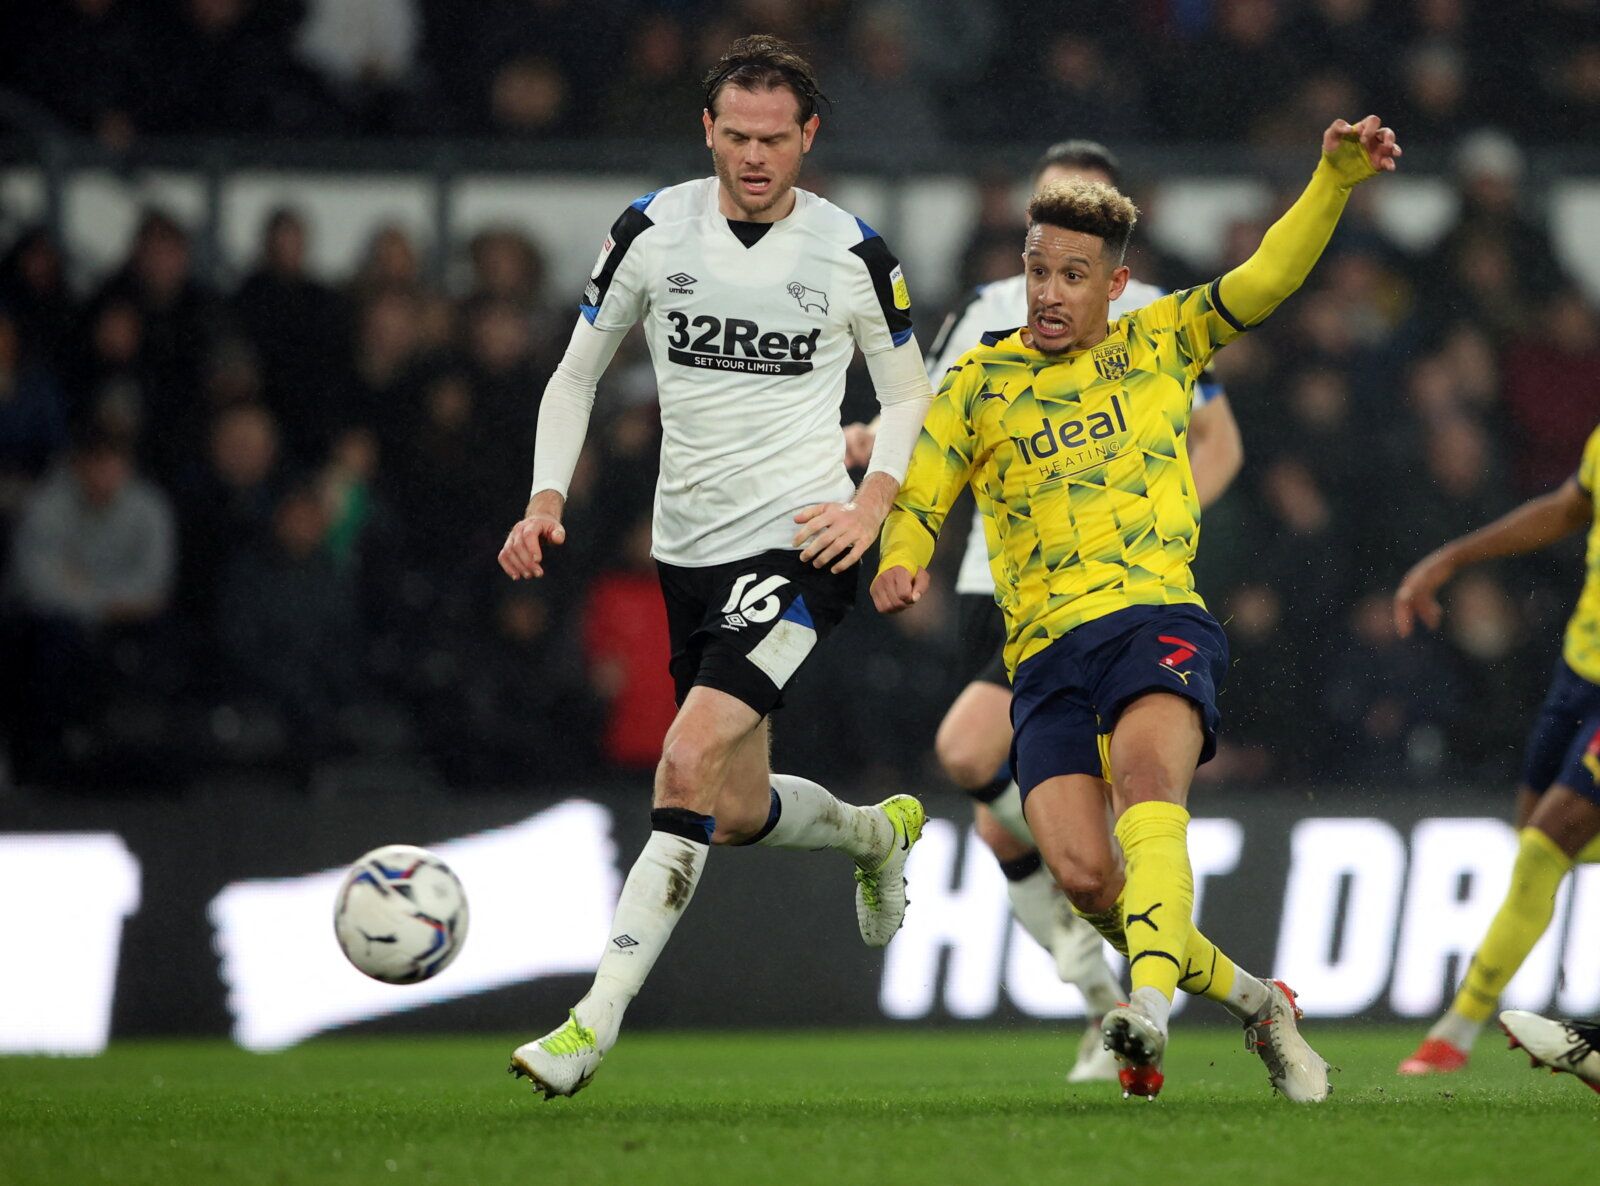 Soccer Football - Championship - Derby County v West Bromwich Albion - Pride Park, Derby, Britain - December 27, 2021 West Bromwich Albion's Callum Robinson shoots at goal  Action Images/Molly Darlington  EDITORIAL USE ONLY. No use with unauthorized audio, video, data, fixture lists, club/league logos or 